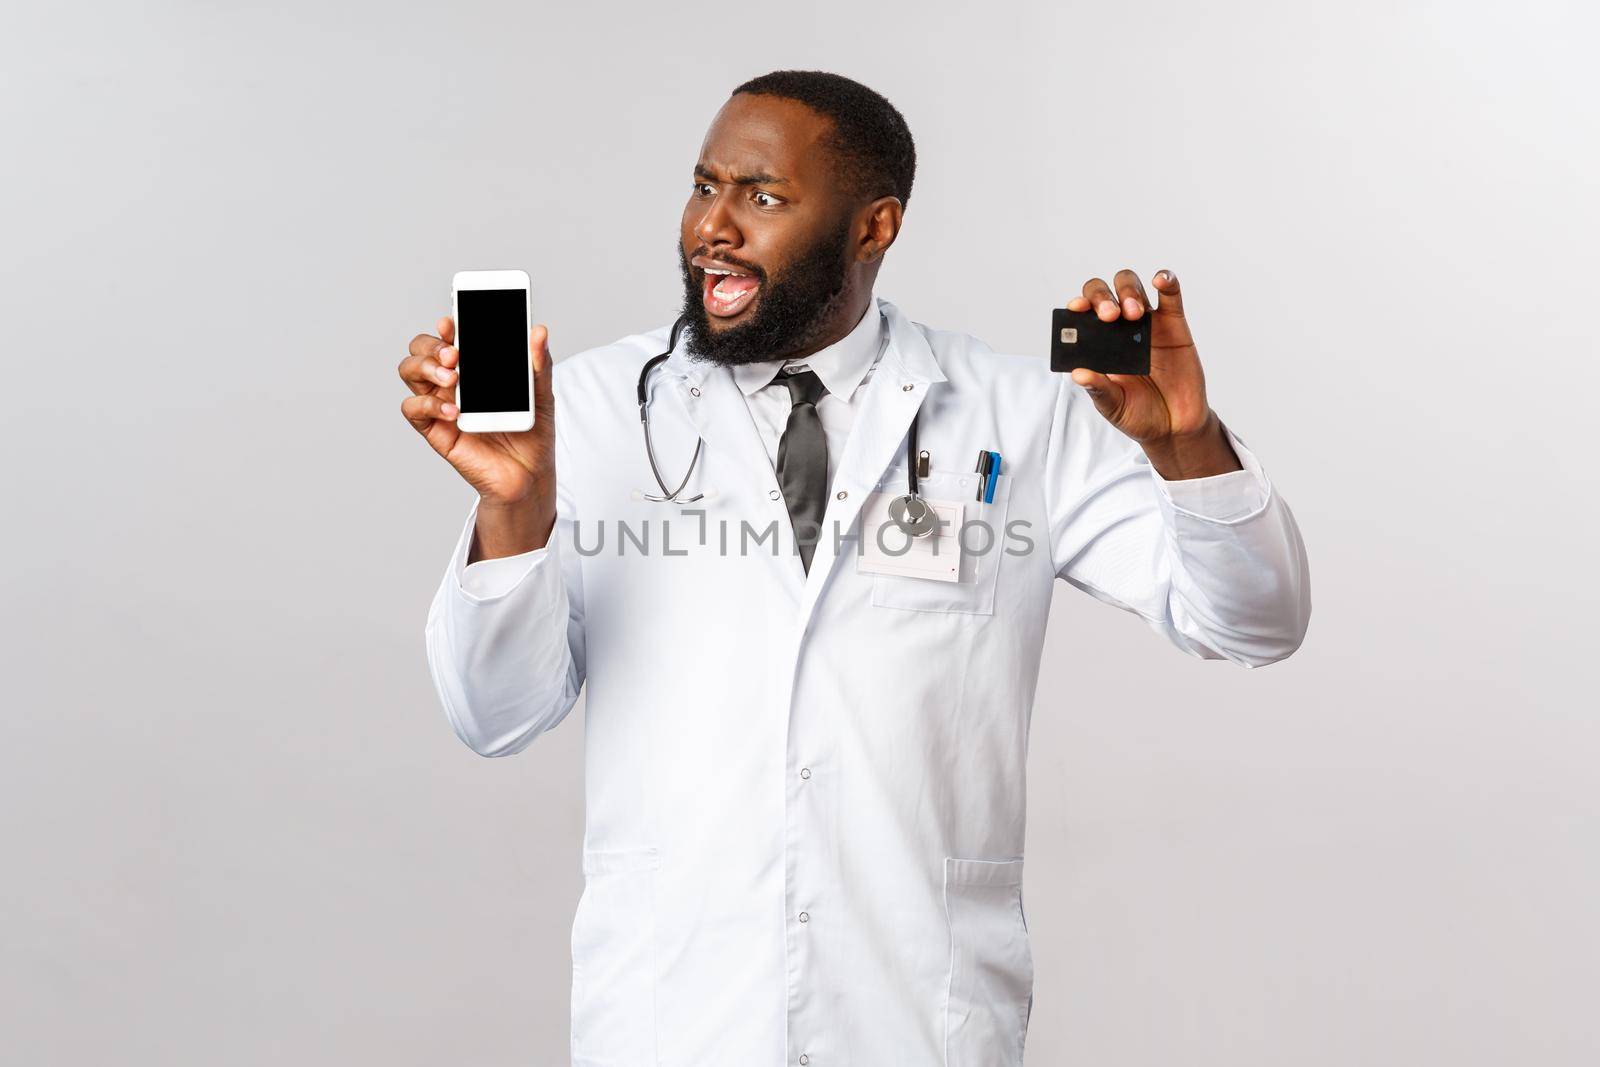 Covid19, pandemic and online medicine concept. Complaining angry african-american man looking at mobile phone display, hold credit card, outraged with huge bills and expensive app subscribtion.